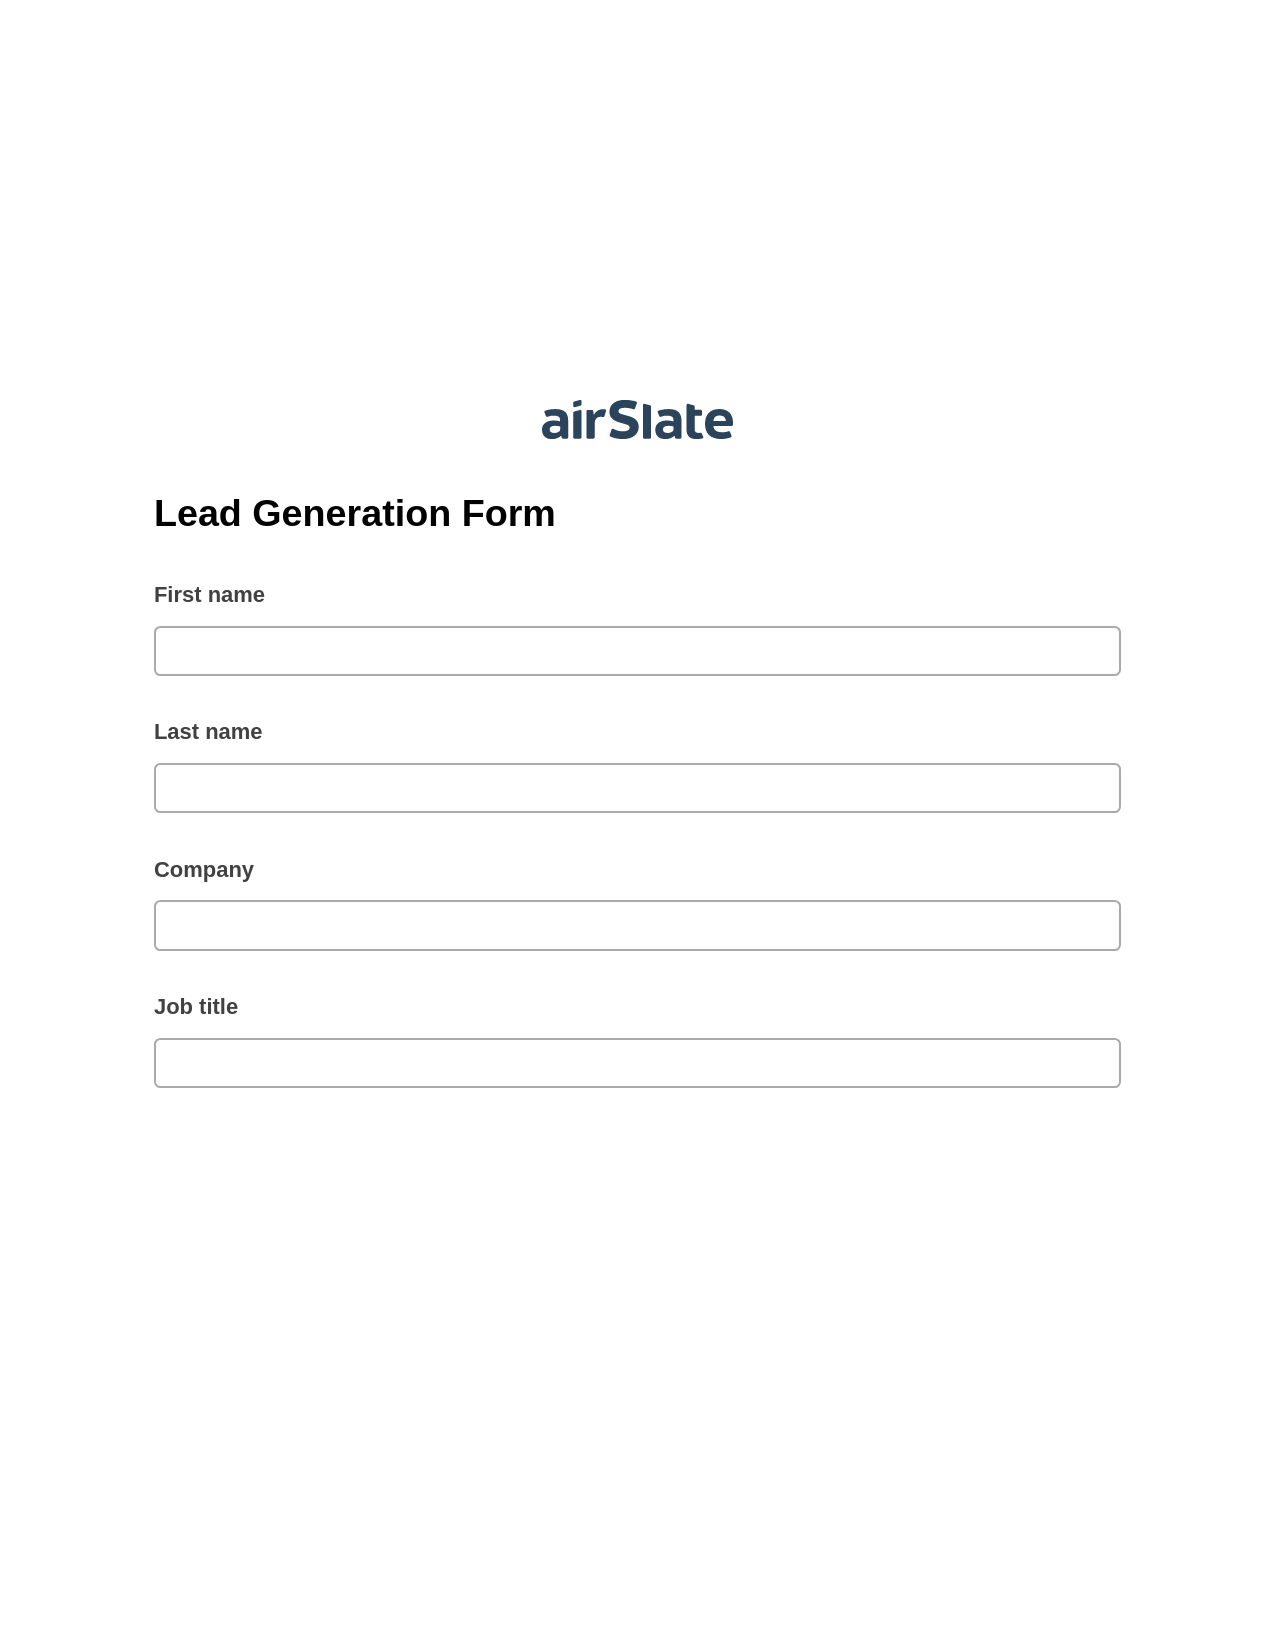 Lead Generation Form Pre-fill Dropdowns from Airtable, Create slate bot, Export to Google Sheet Bot